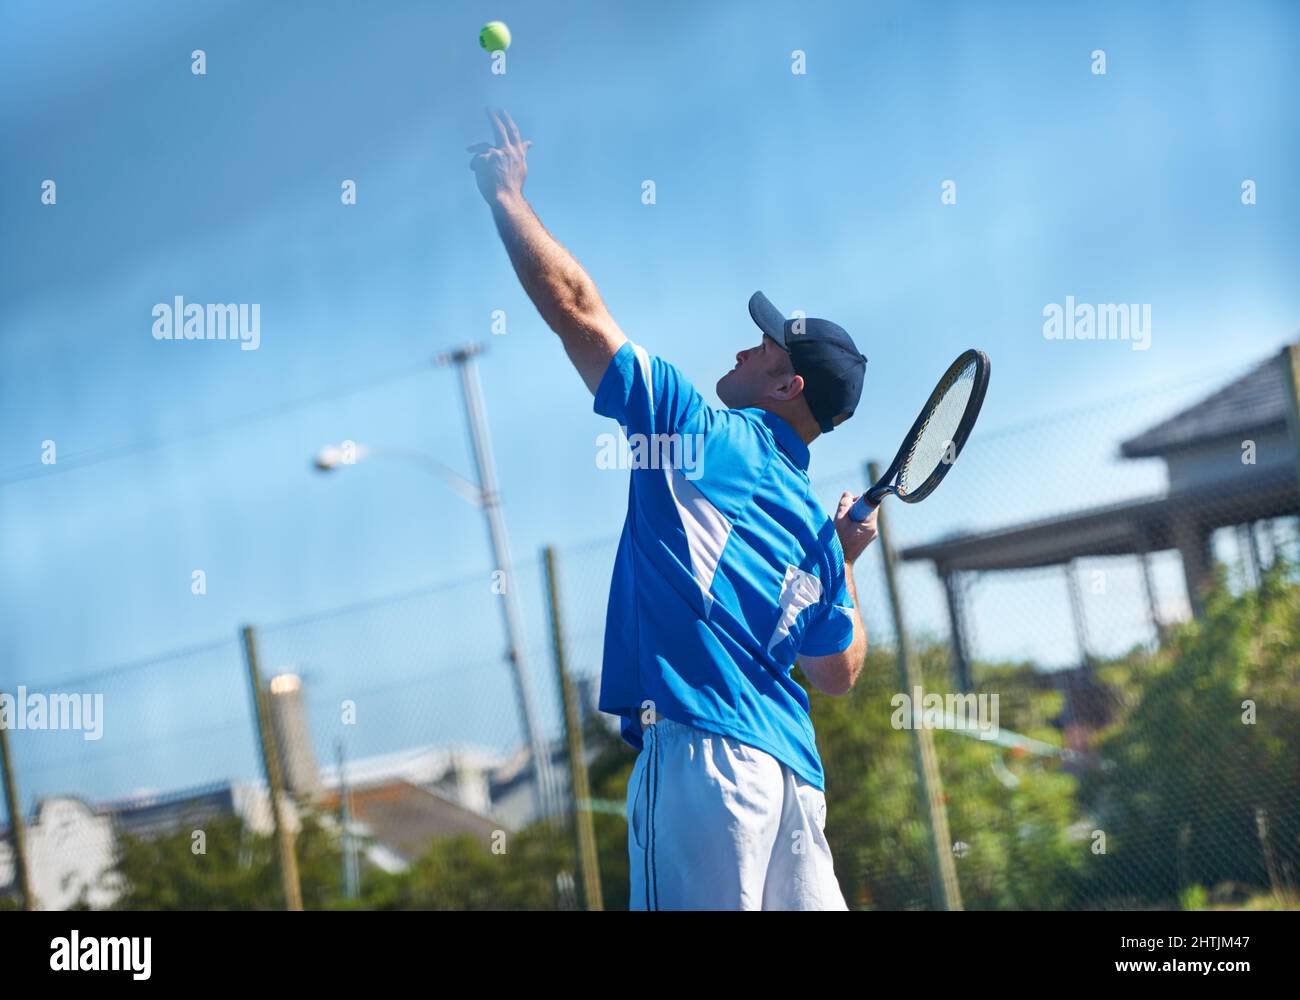 Blasting a serve. A male tennis player tossing the ball up into the air for a service - Tennis. Stock Photo